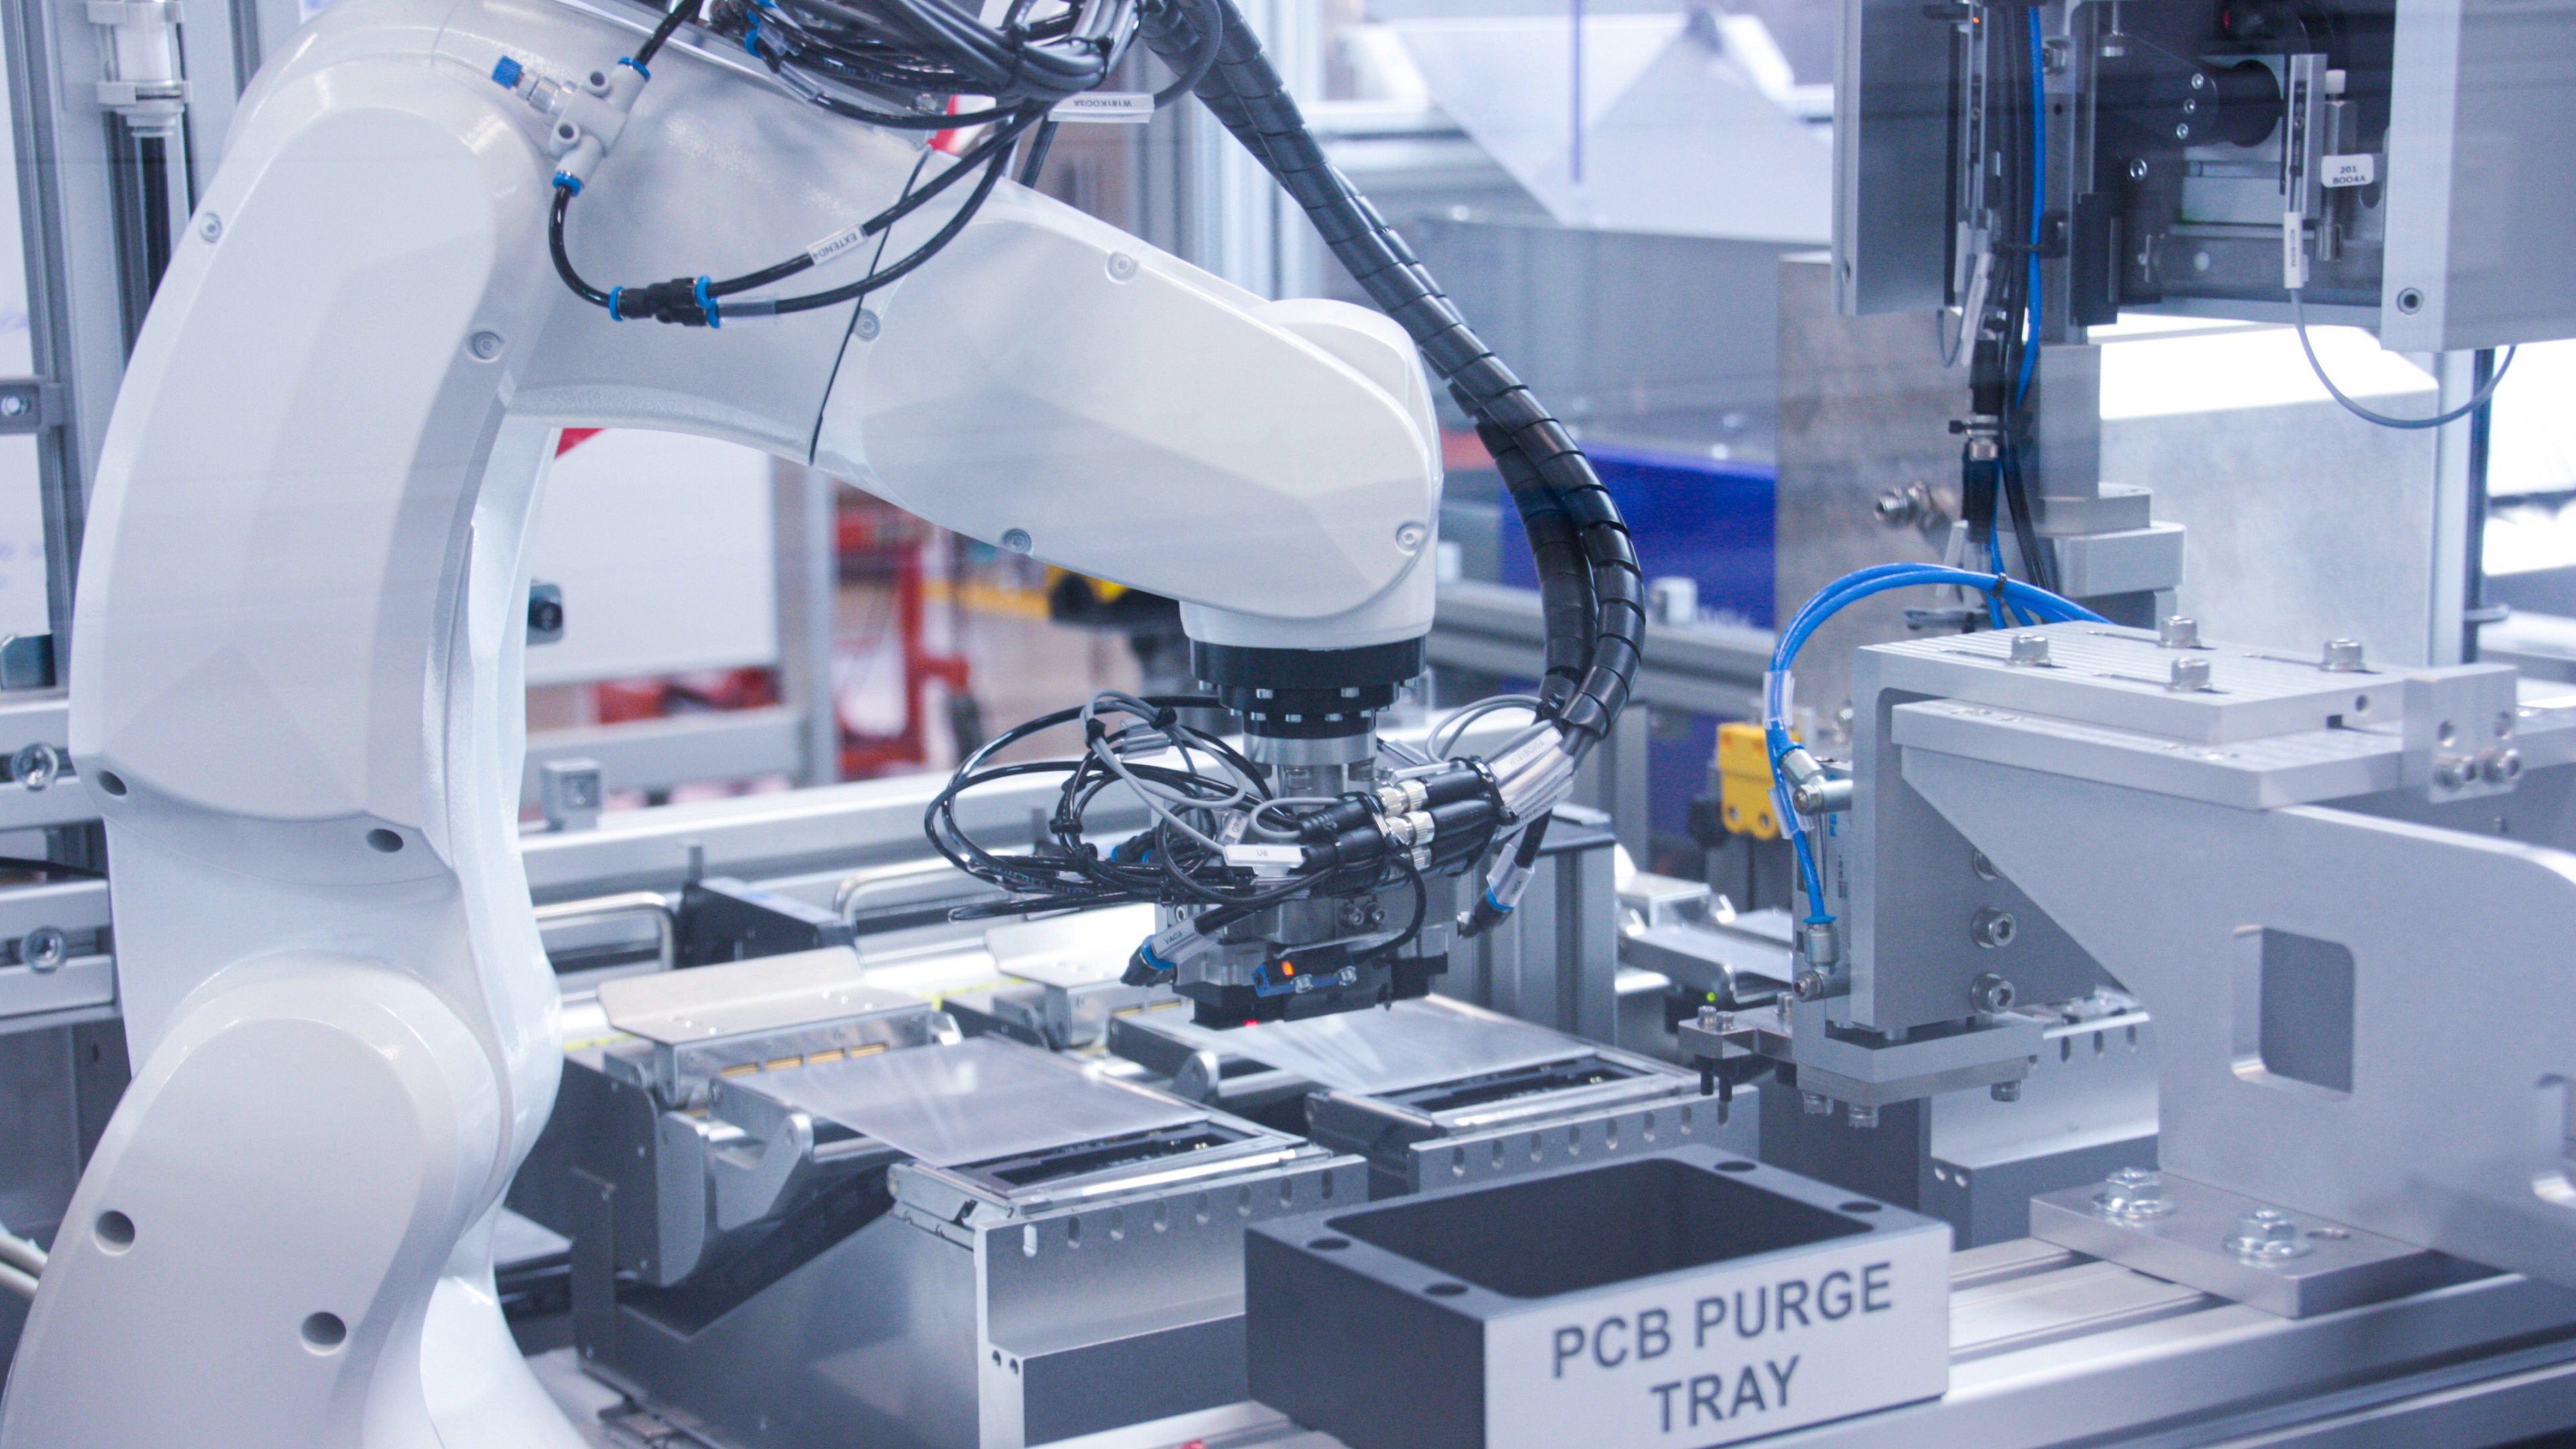 Robotic arms in manufacturing  diagnostic tests in production line.